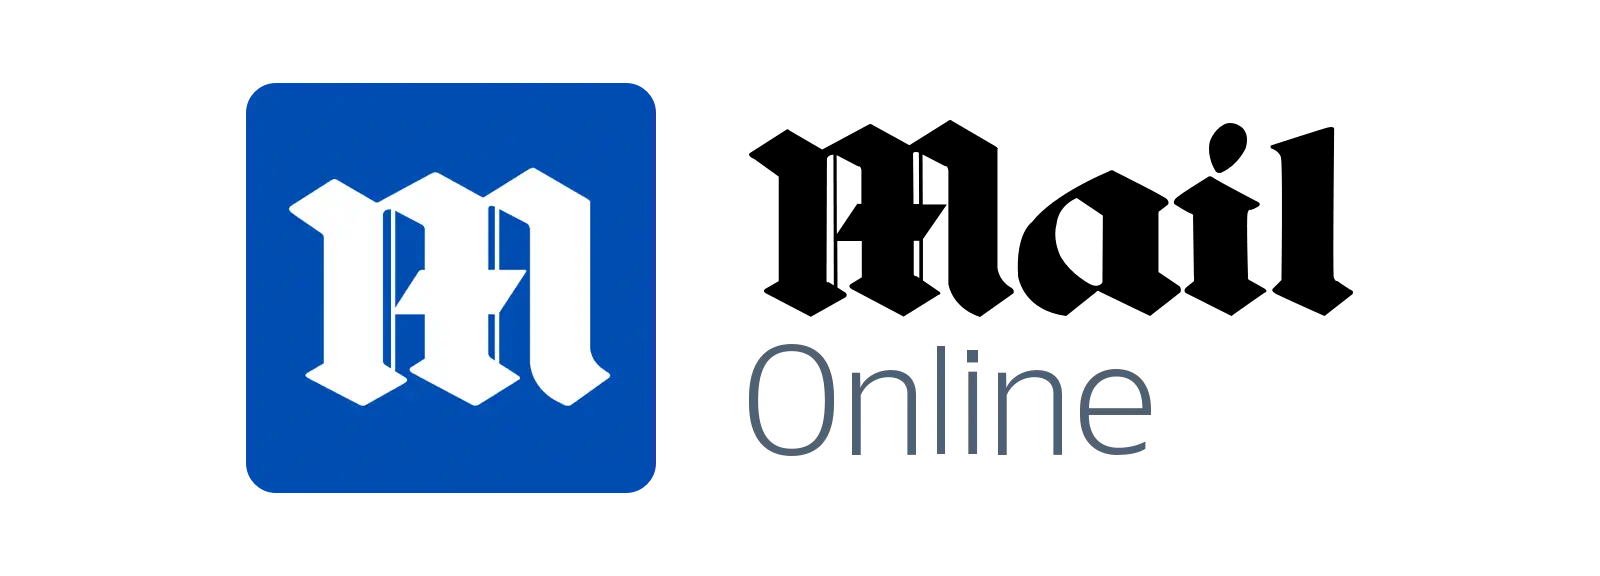 the daily mail online logo. A blue square logo with an olde english style M in white. On the right is the text Mail Online in black